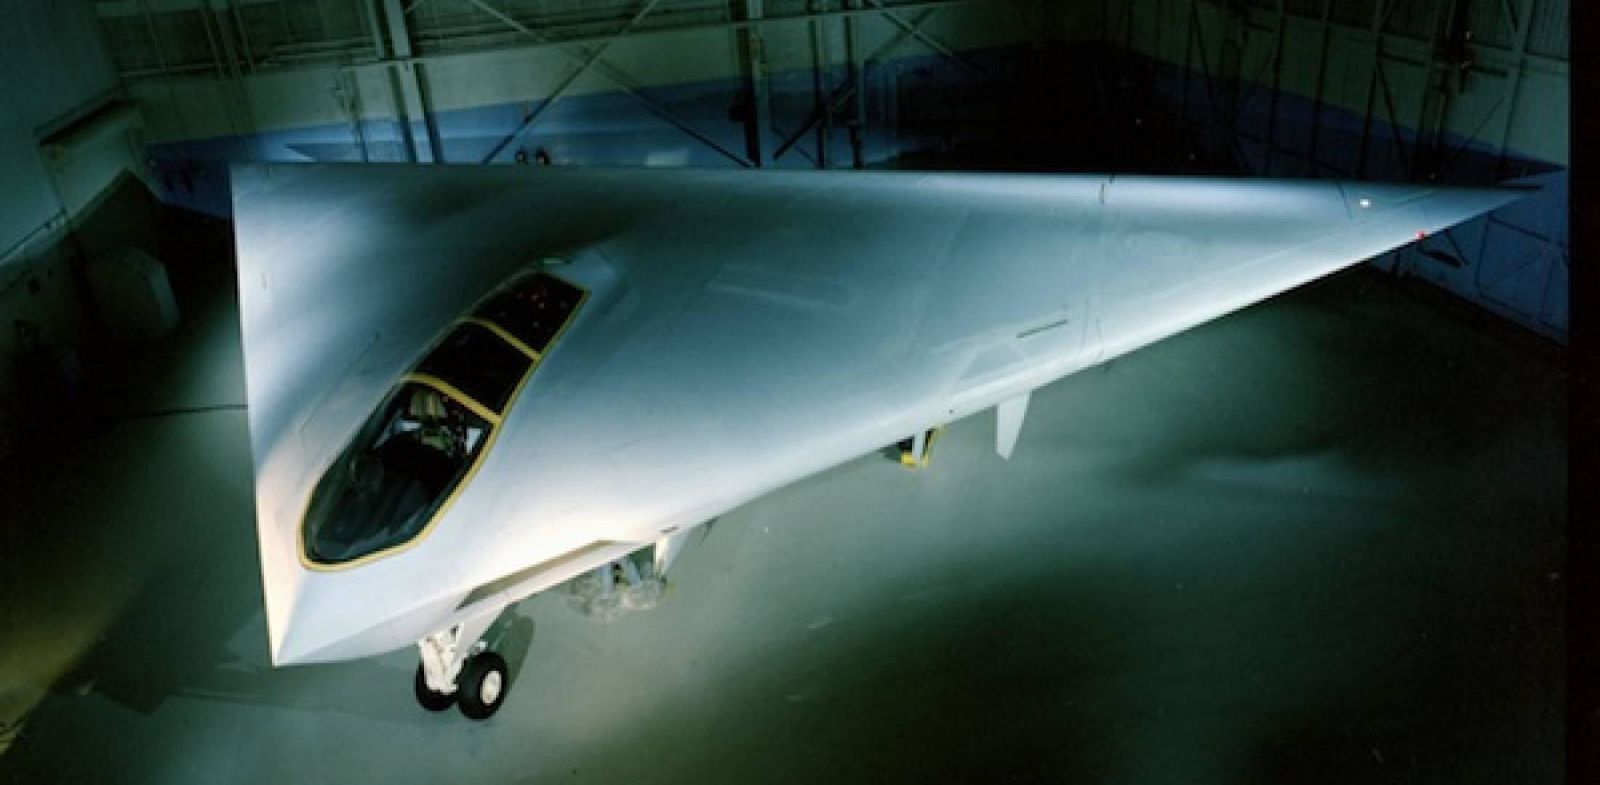 A full-scale mockup of the A-12 Avenger II was built by General Dynamics